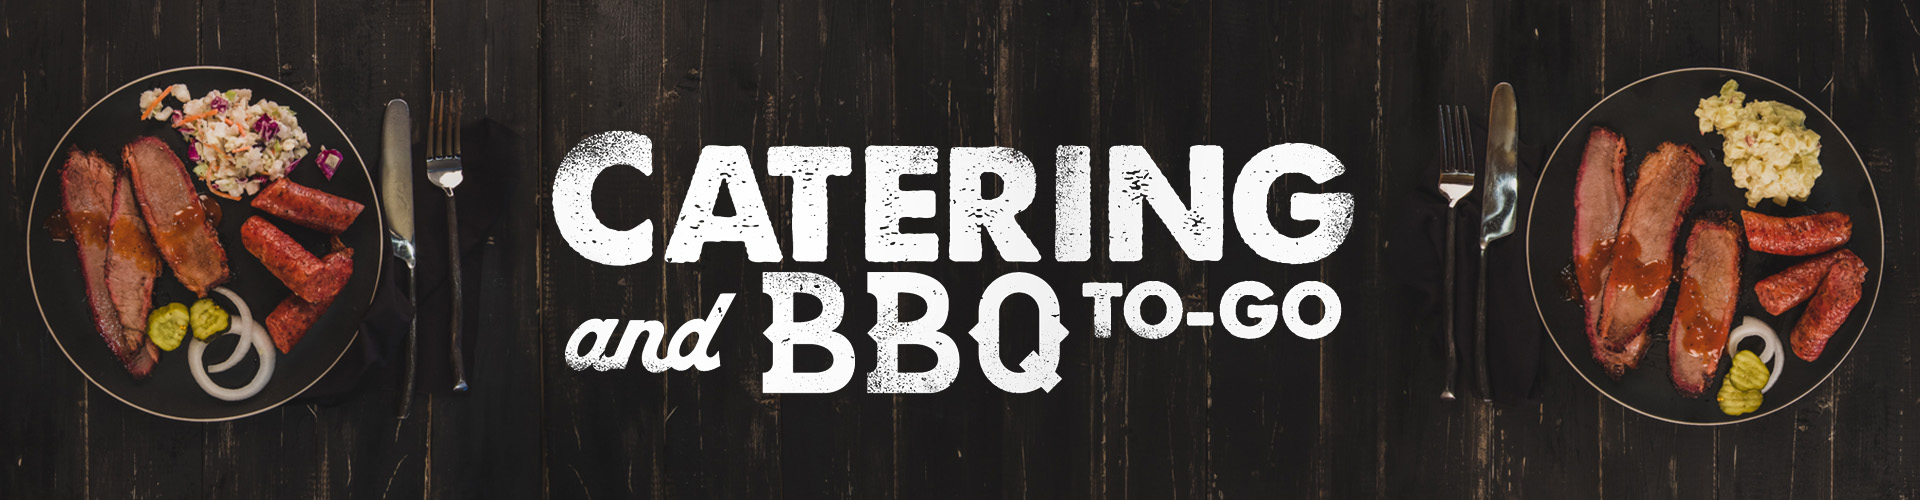 Meyer's Catering & BBQ To-Go Banner